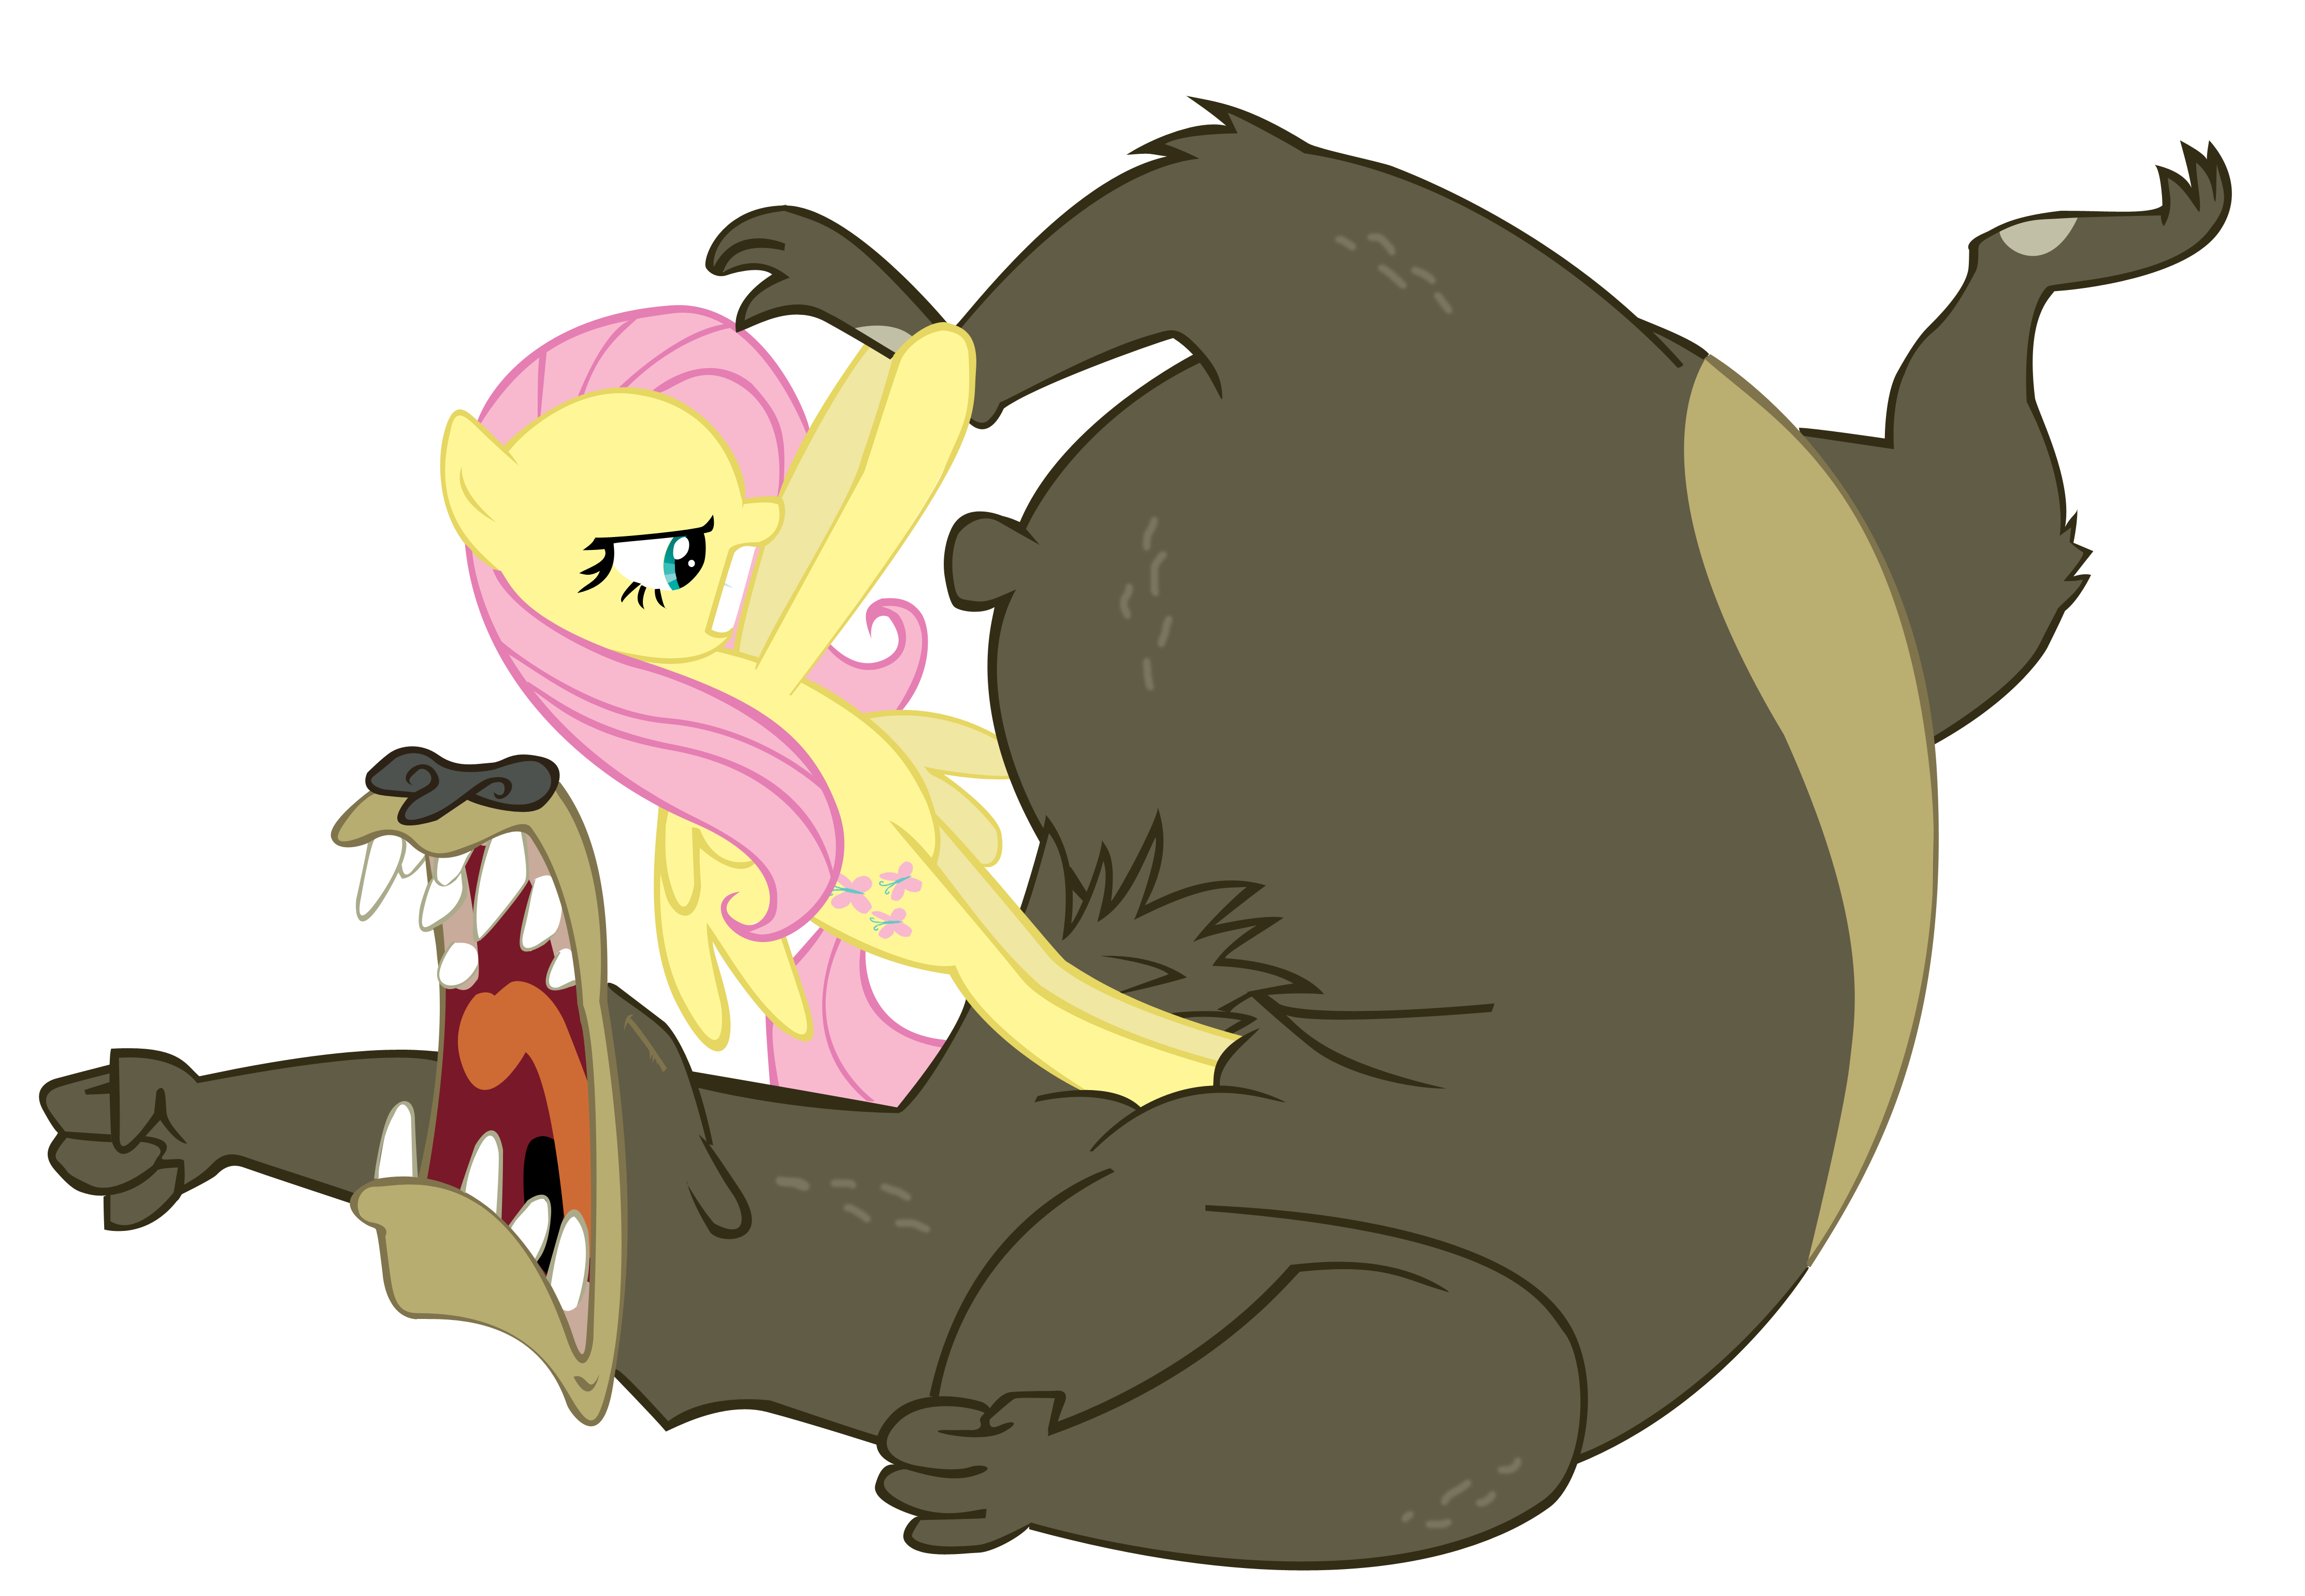 fluttershy_attacking_a_bear_by_svezate-d